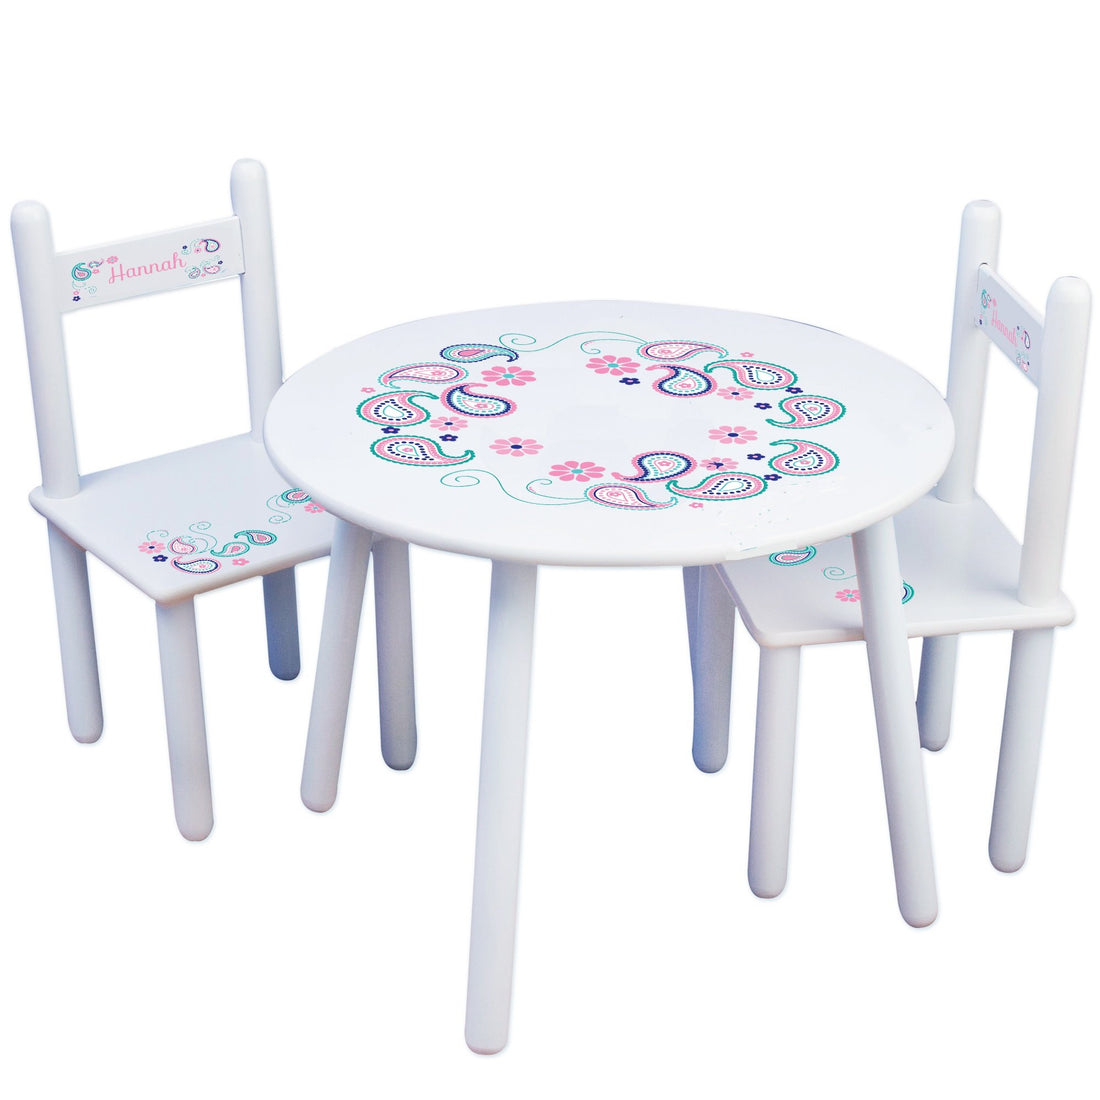 Personalized Table and Chairs with Paisley Teal and Pink design